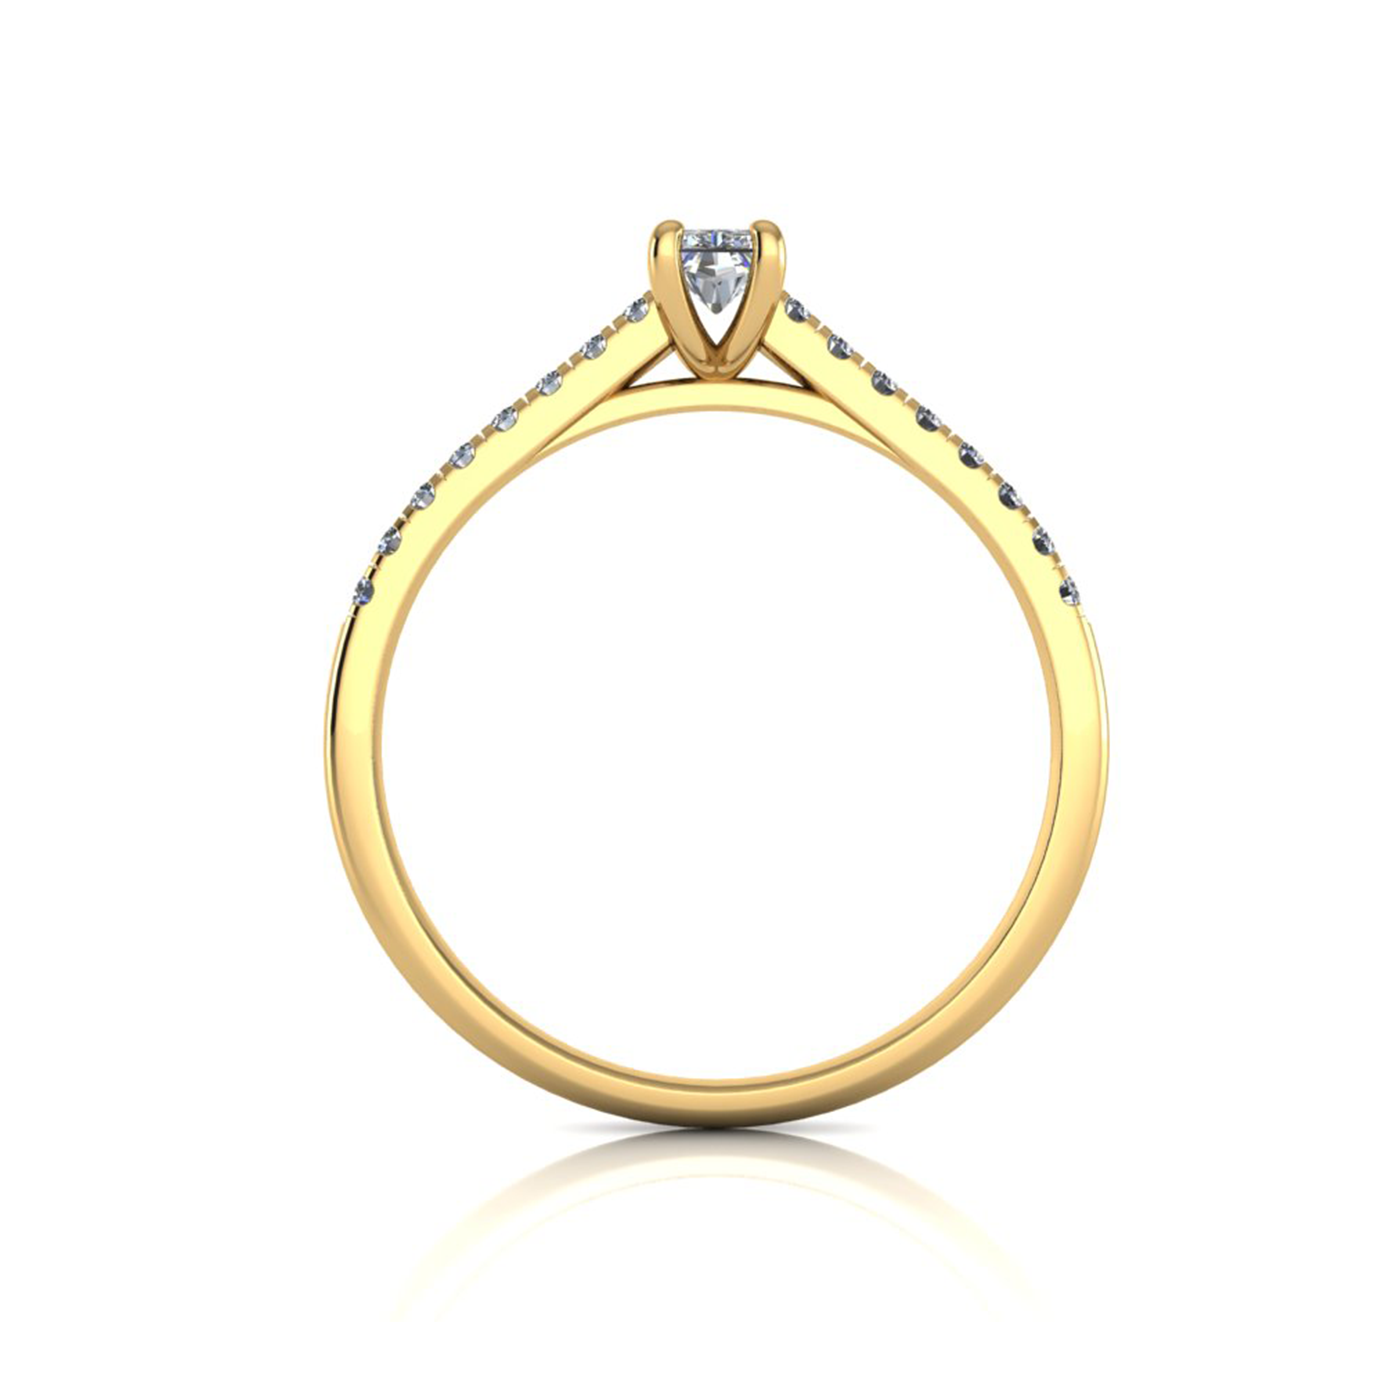 18k yellow gold  0,30 ct 4 prongs radiant cut diamond engagement ring with whisper thin pavÉ set band